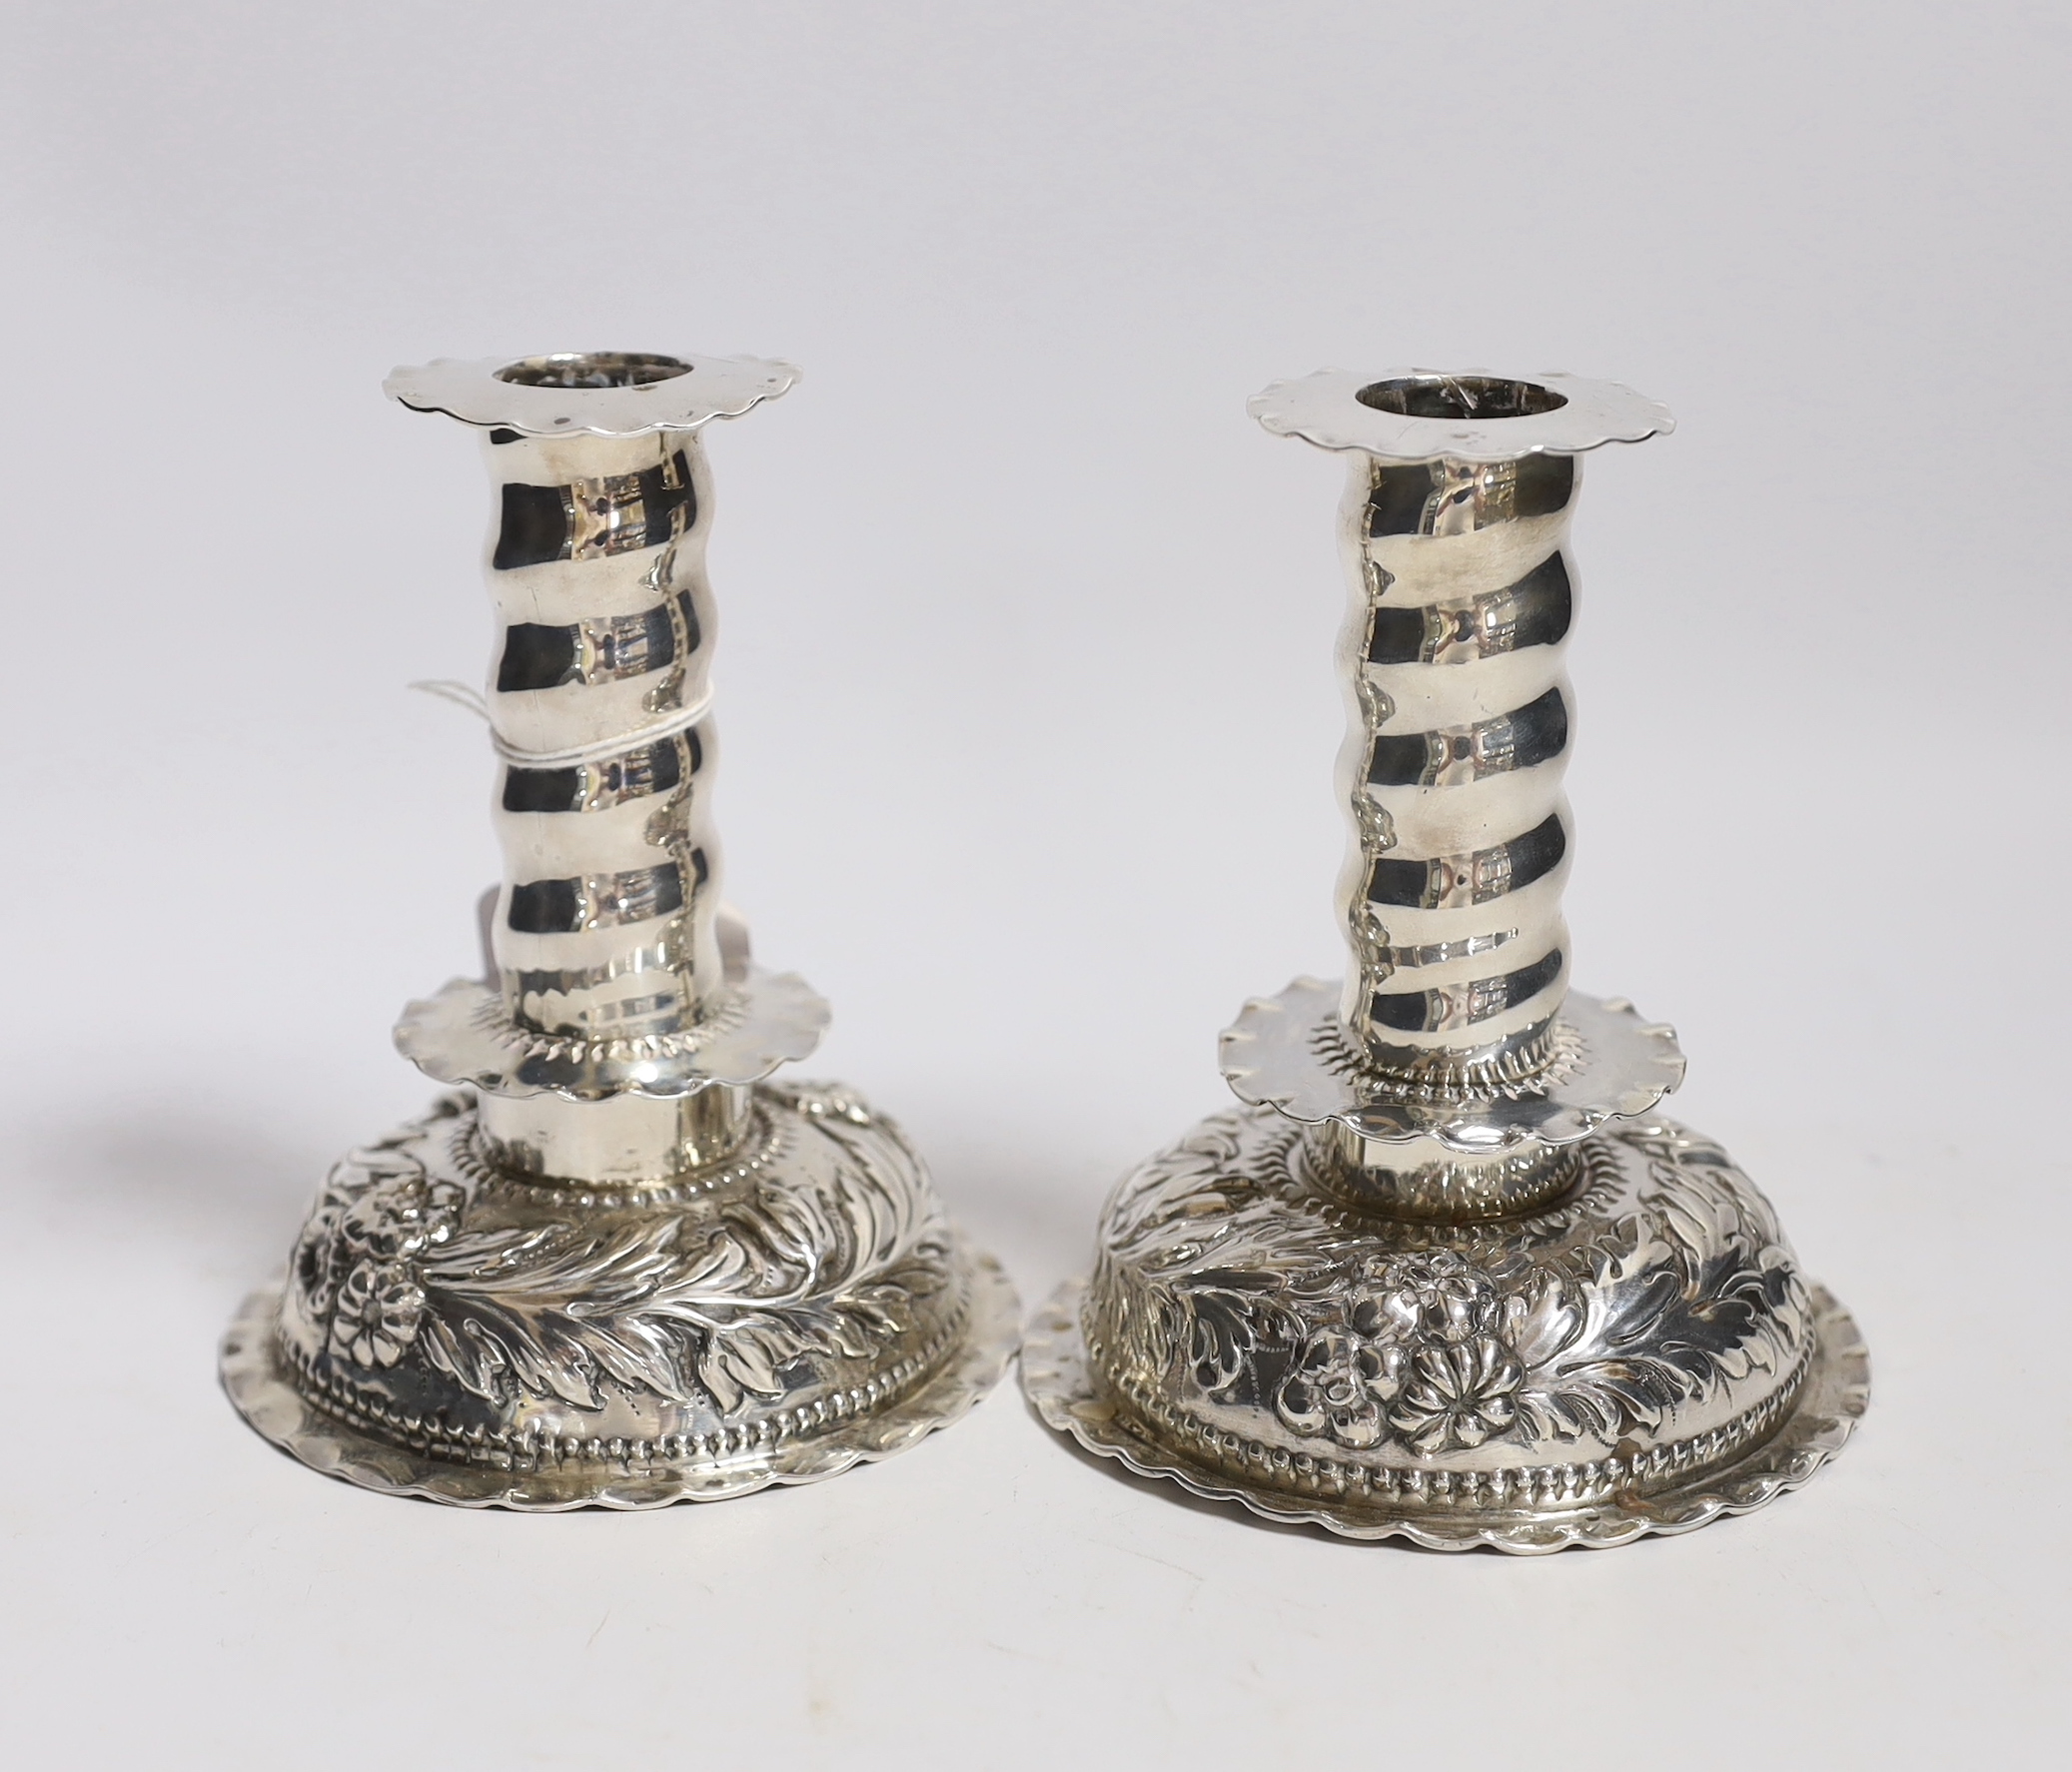 A matched pair of Carolean style silver dwarf candlesticks, London, 1880 & 1885, makers mark on